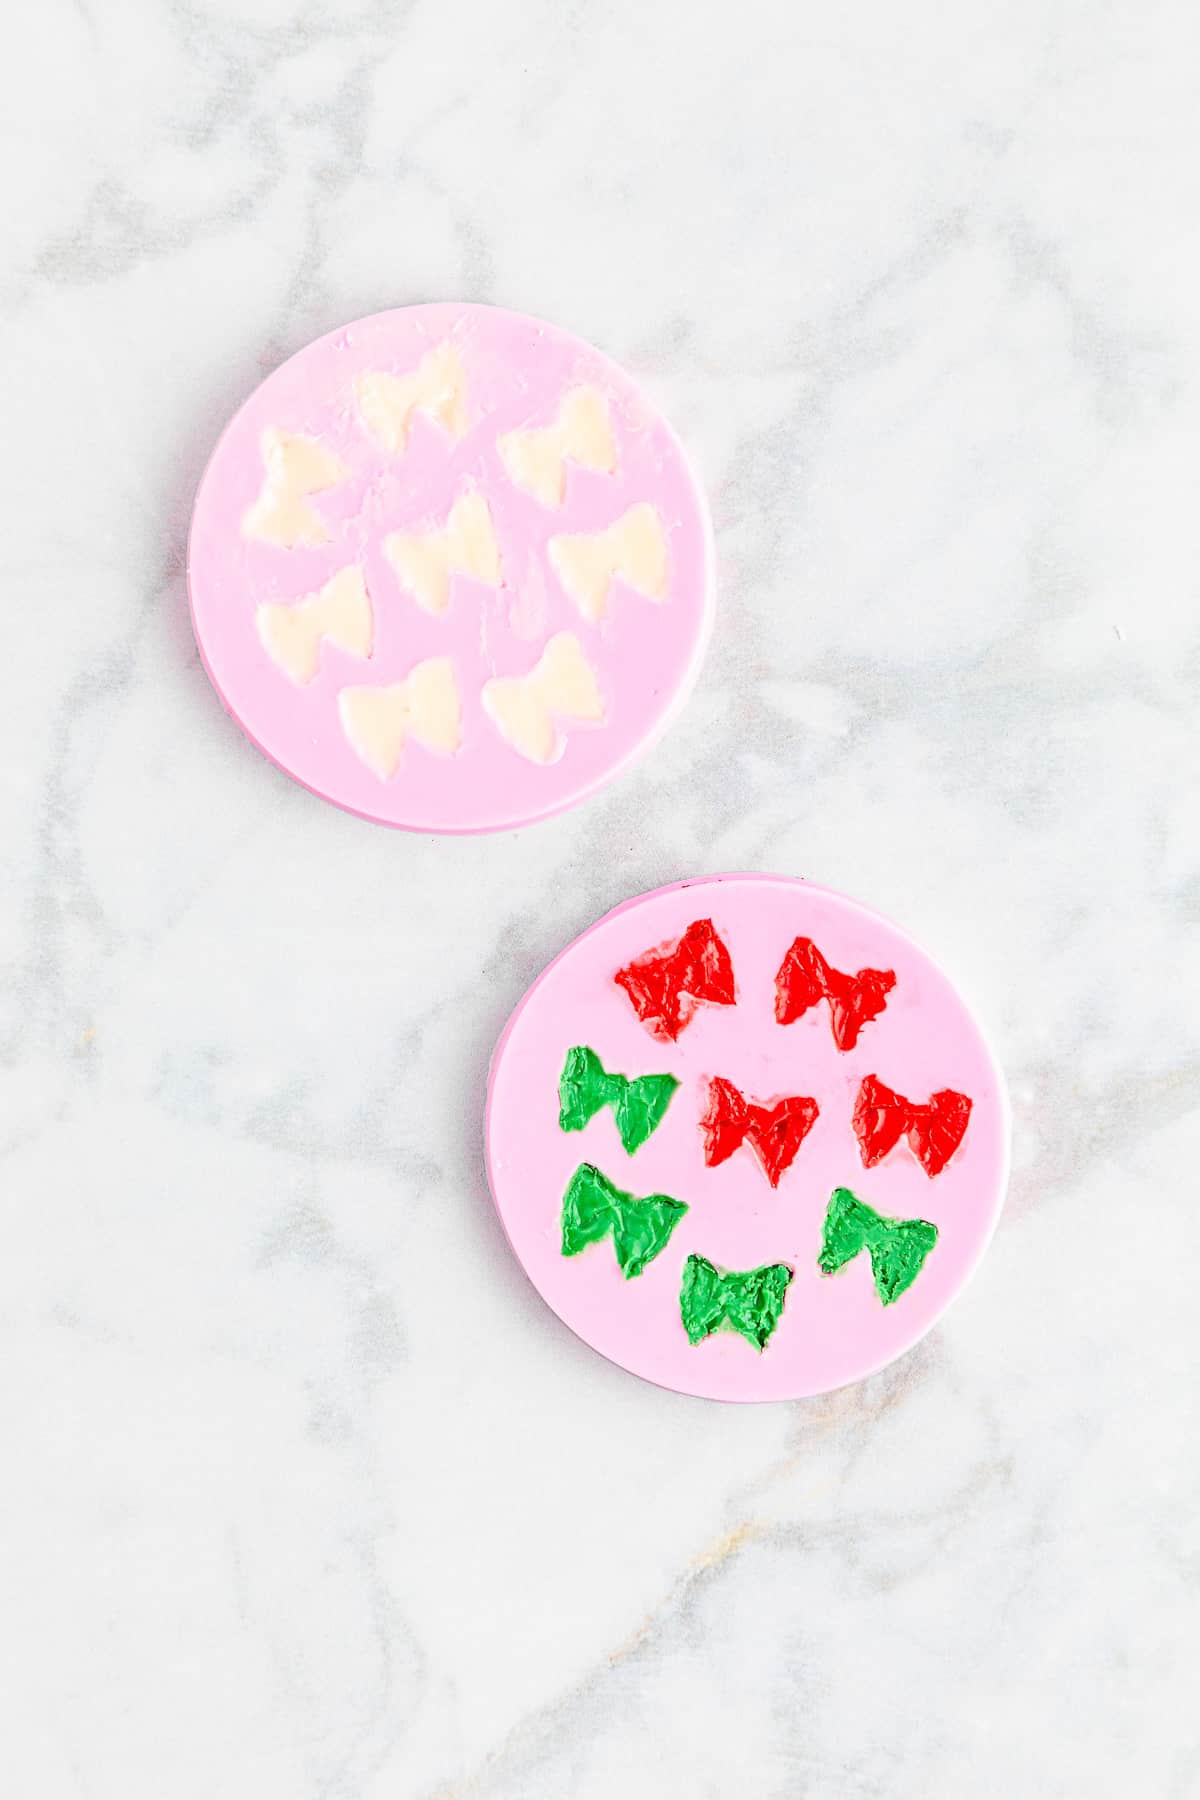 two pink silicone molds with bow shapes full of white, red and green chocolate.